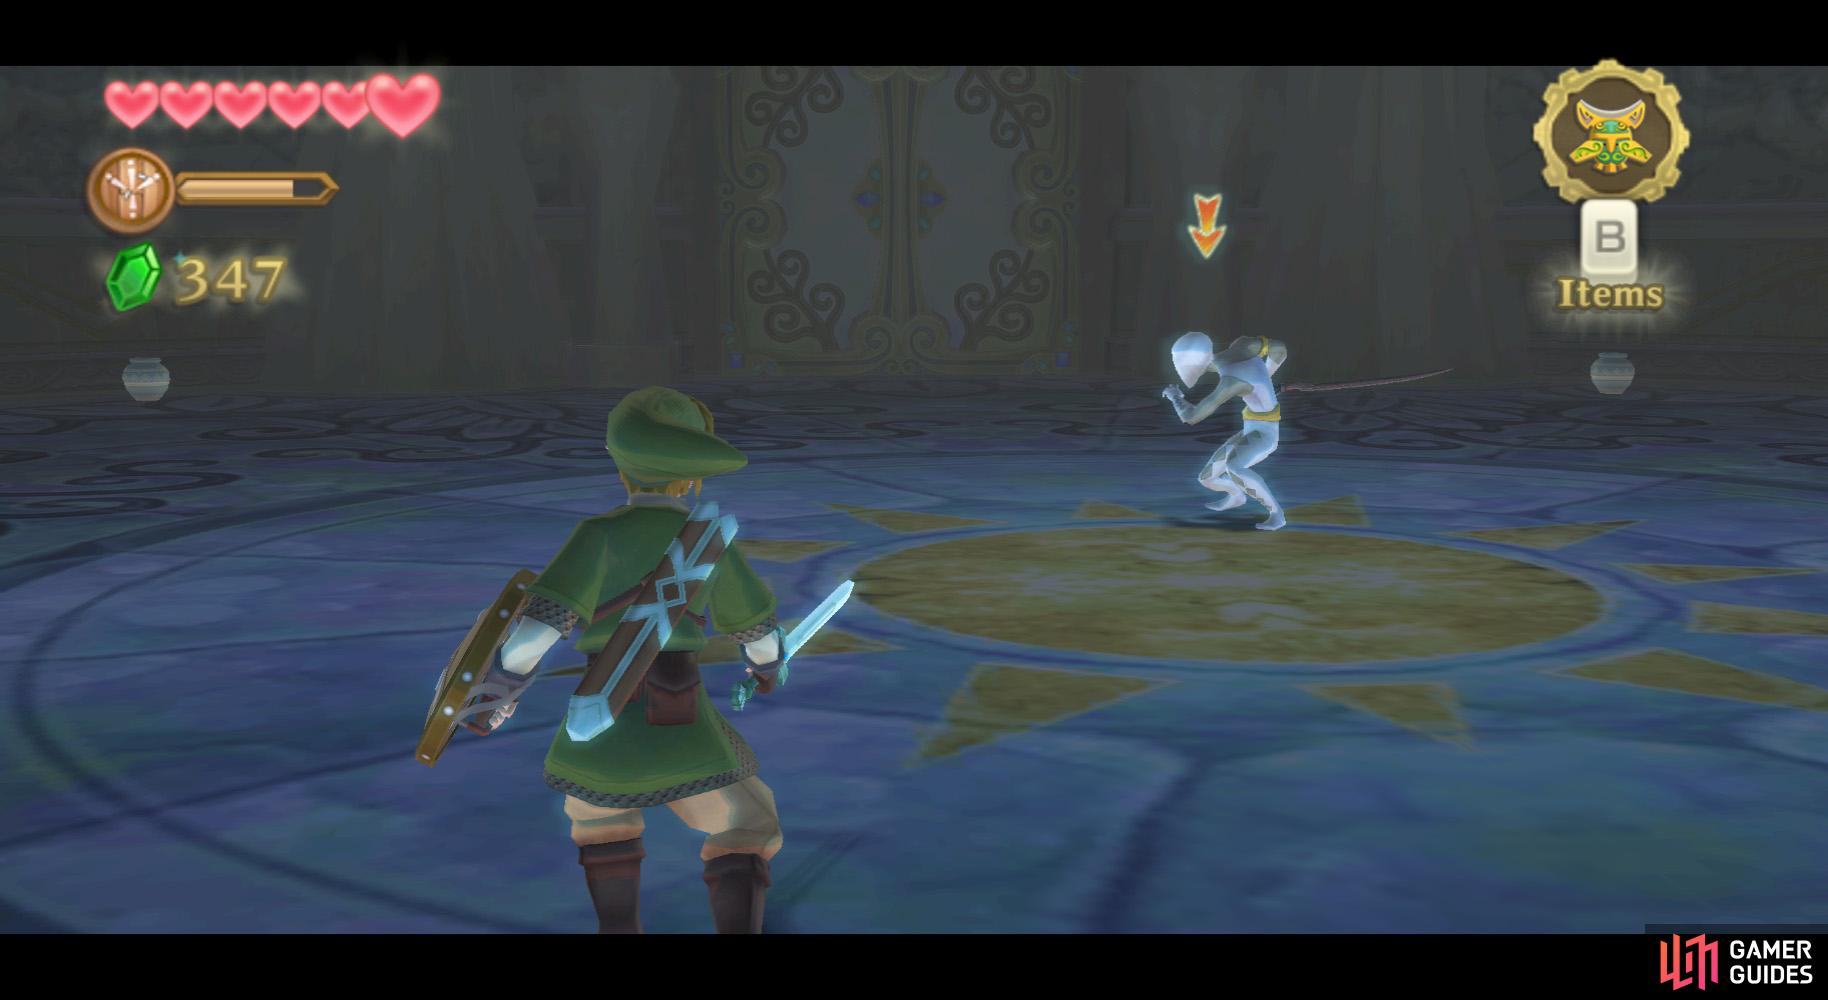 When Ghirahim dashes, use a well-timed shield bash to stun him.